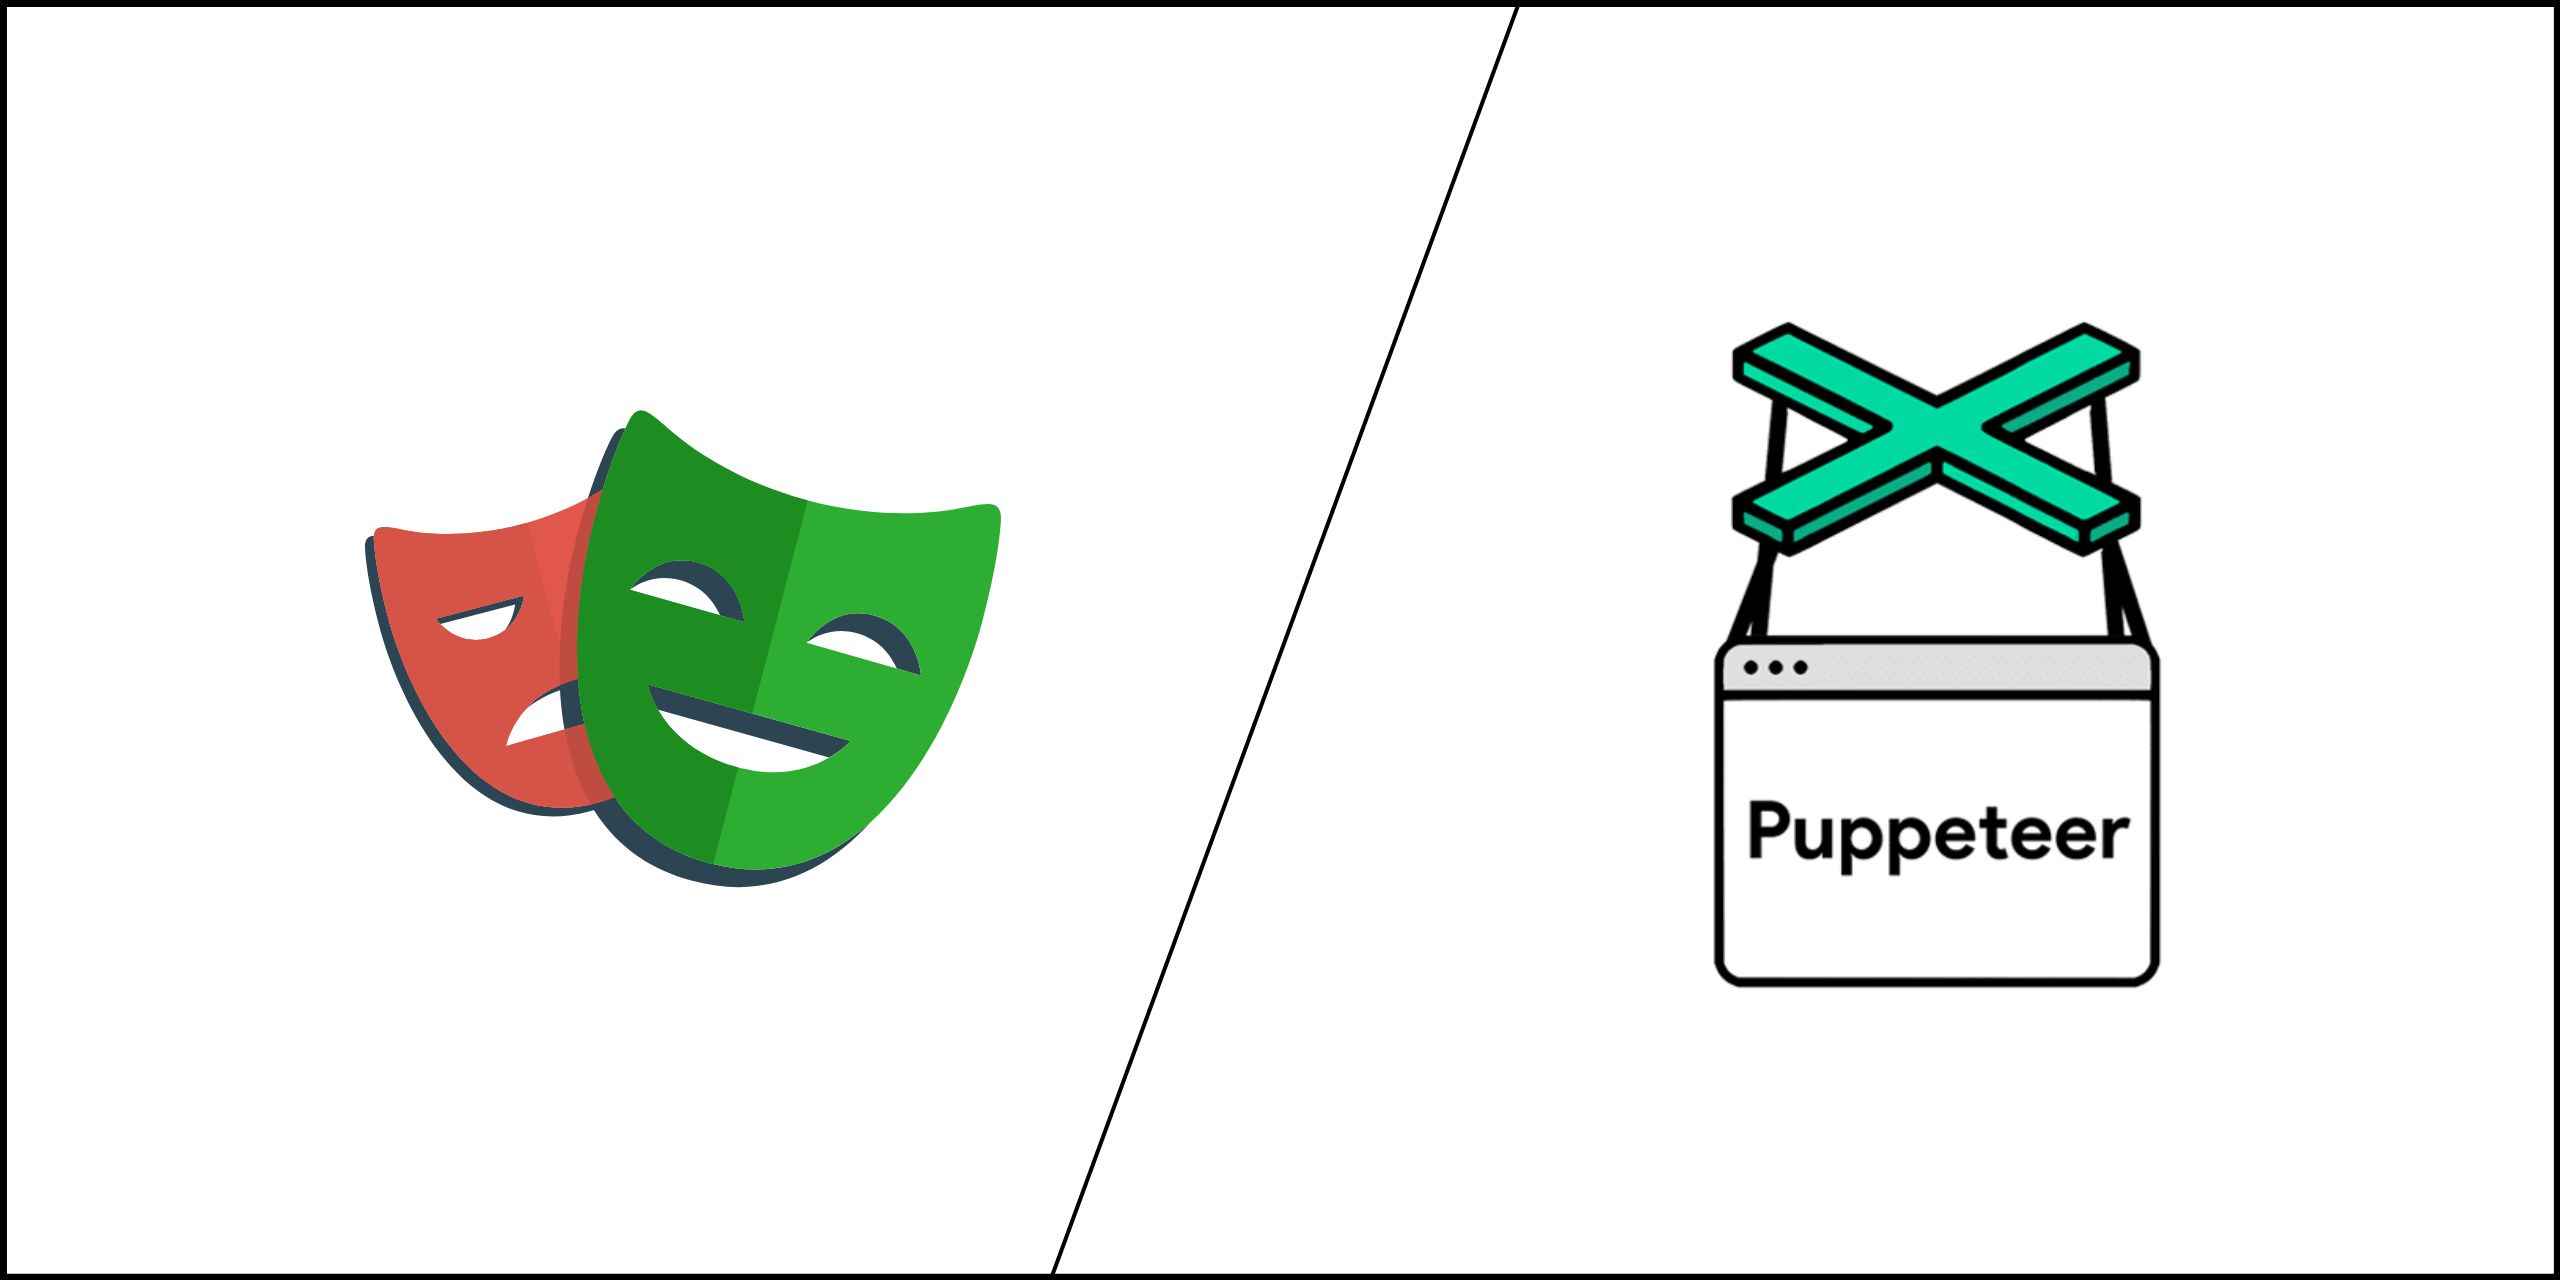 Playwright Vs Puppeteer feature image